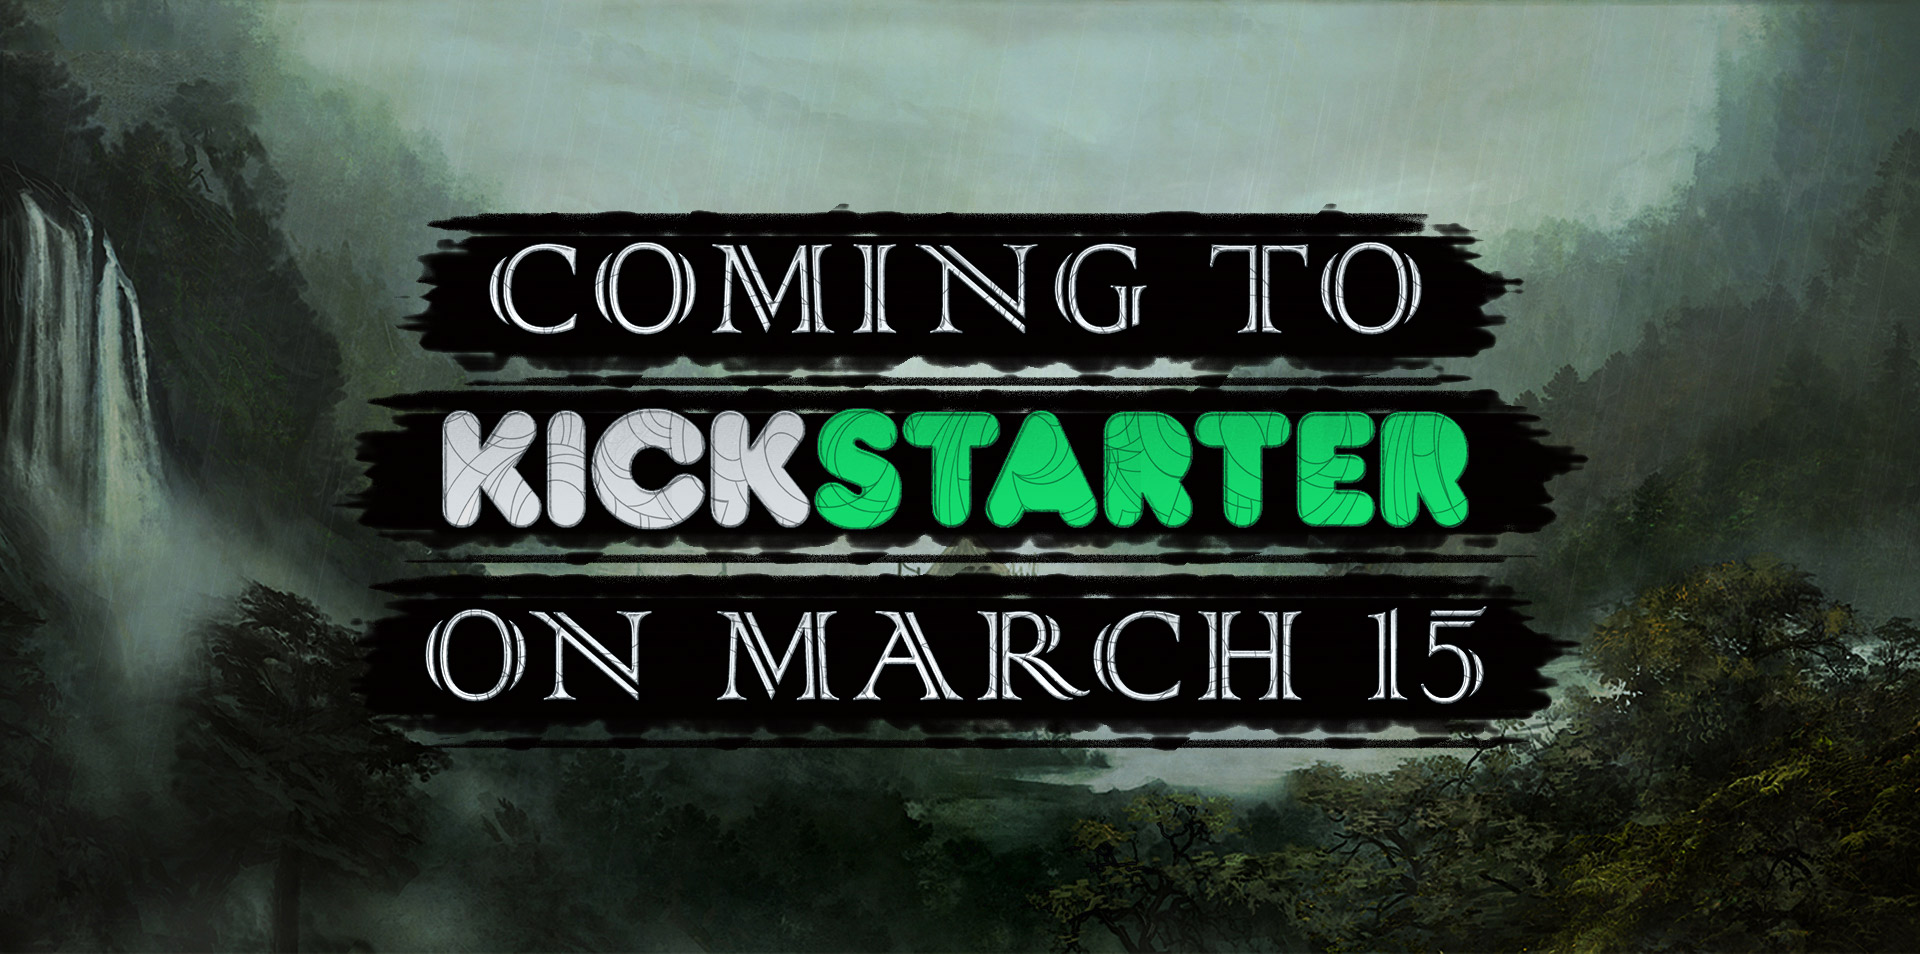 Sacred Fire is coming to Kickstarter on March 15, 2017